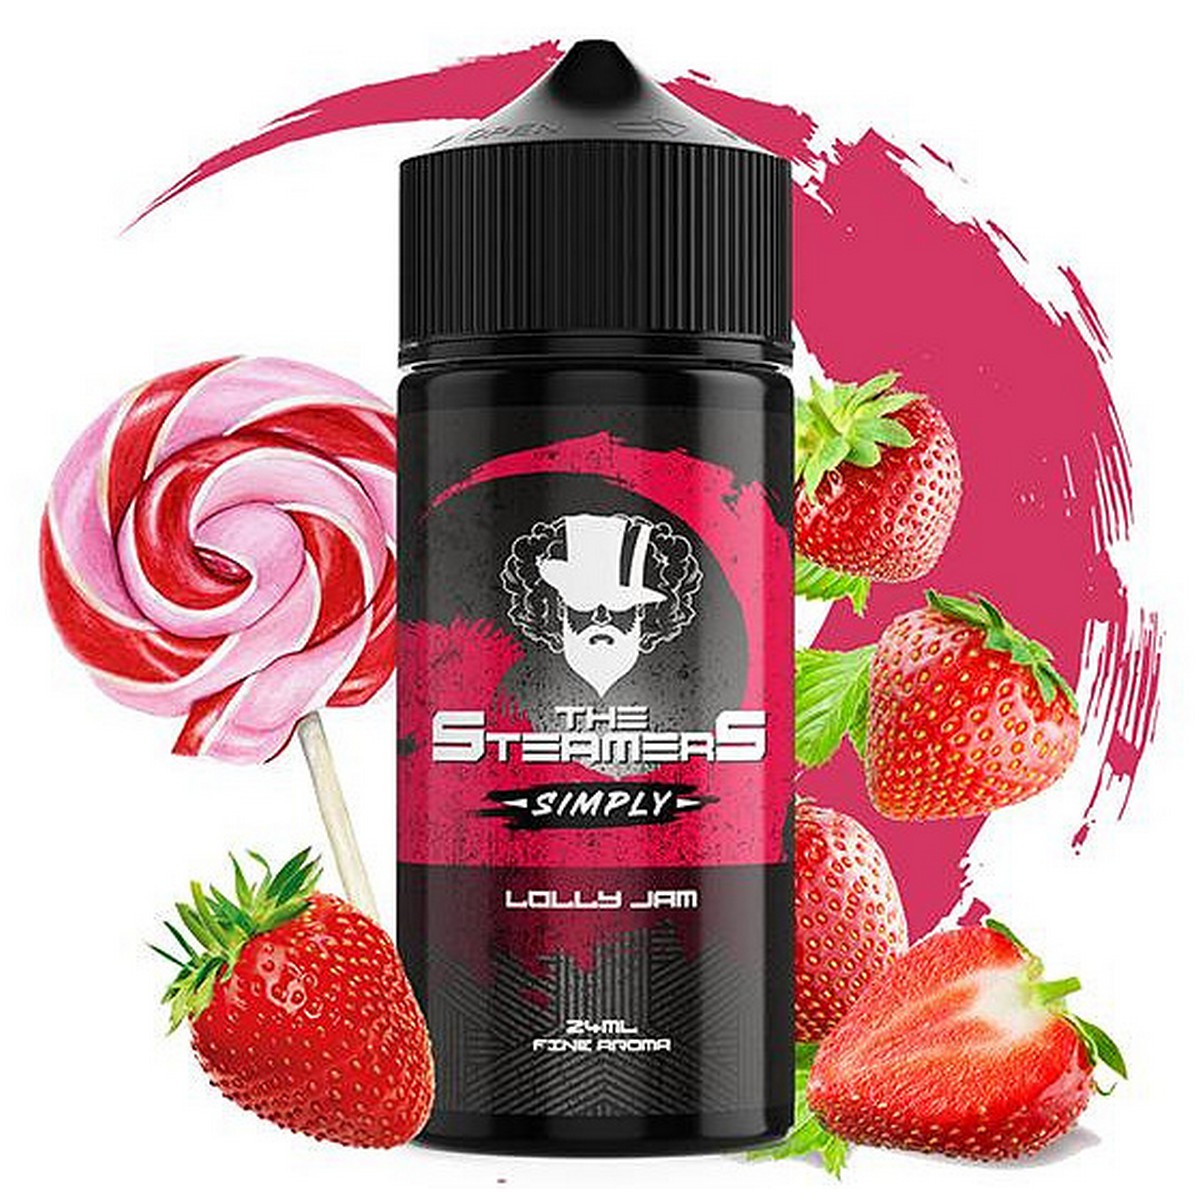 the SteamerS Simply Lolly Jam 24ml/120ml Flavorshot